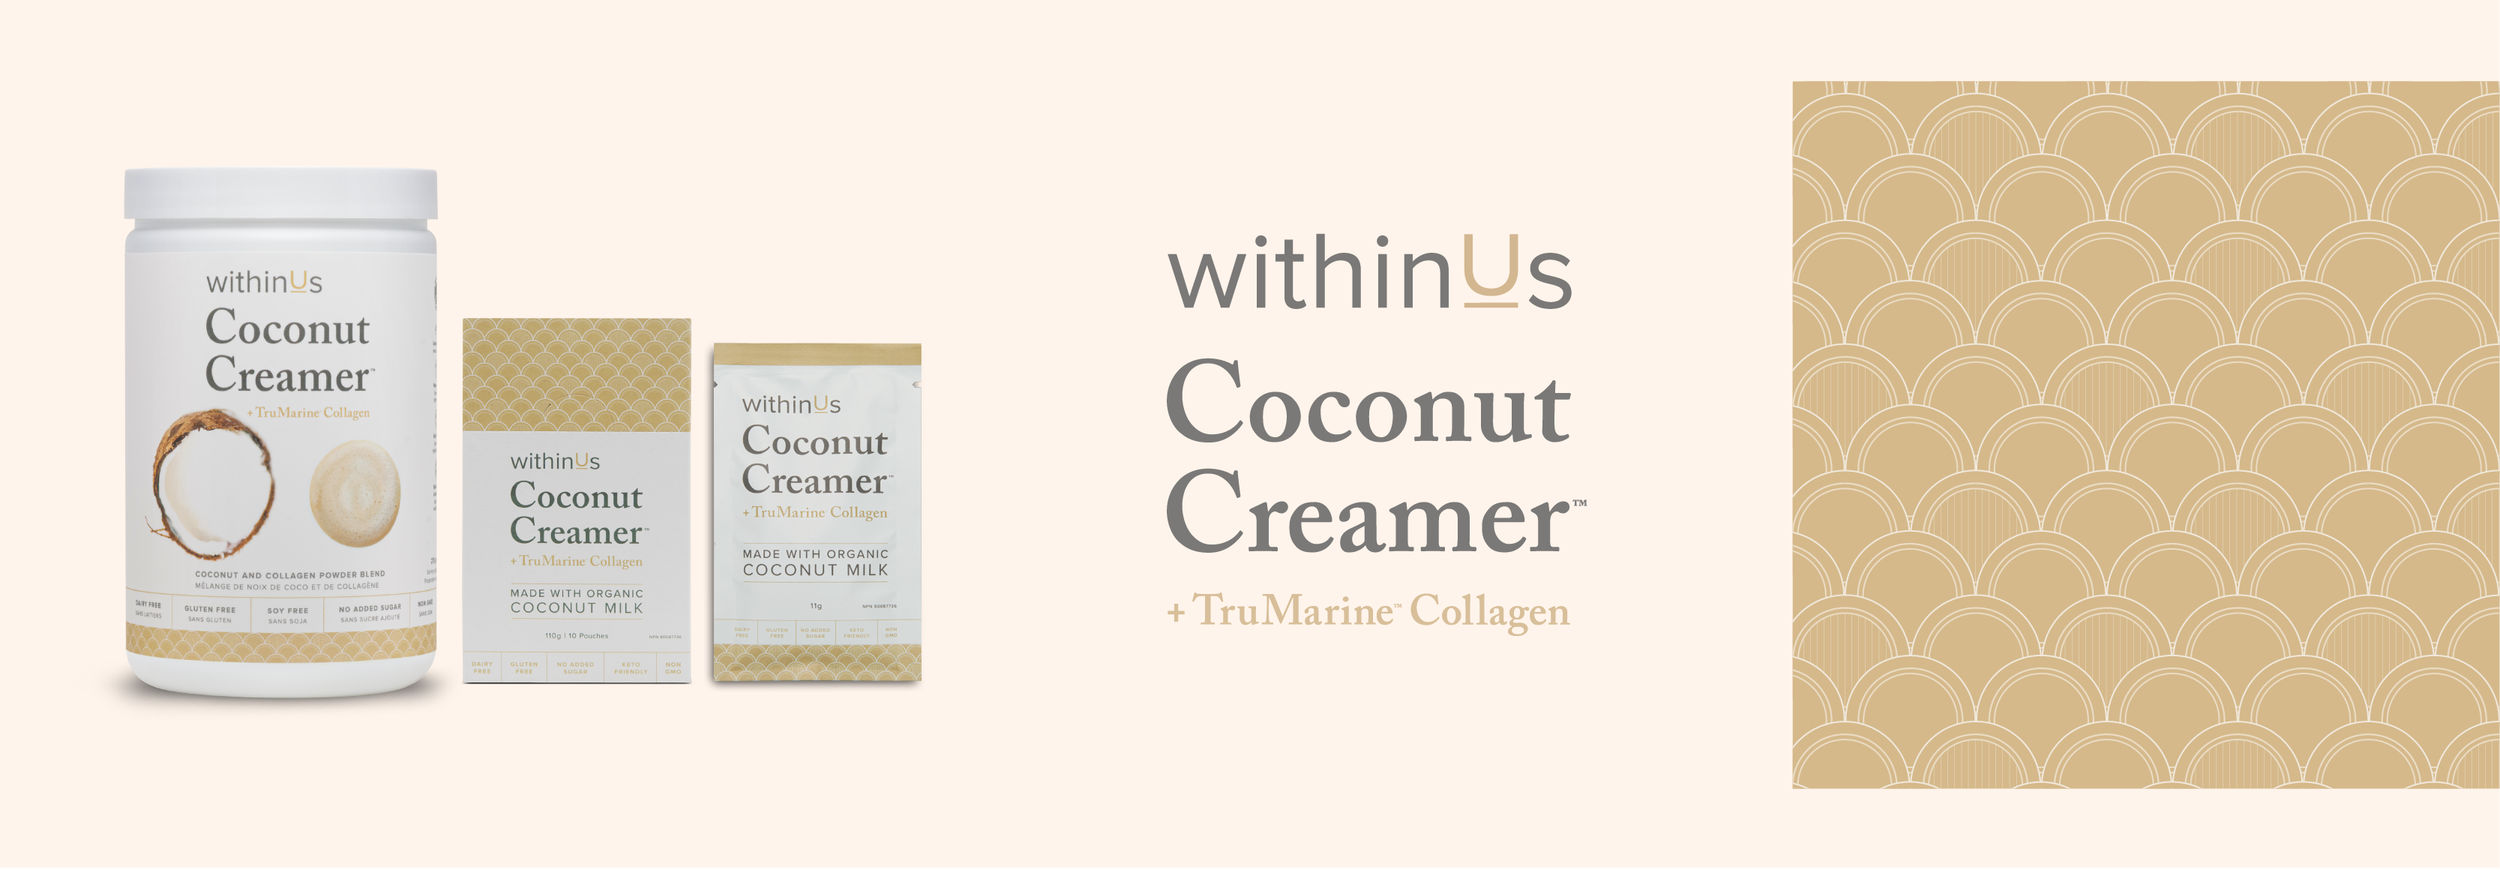 withinUs-Product-Design_Coconut_Creamer.png